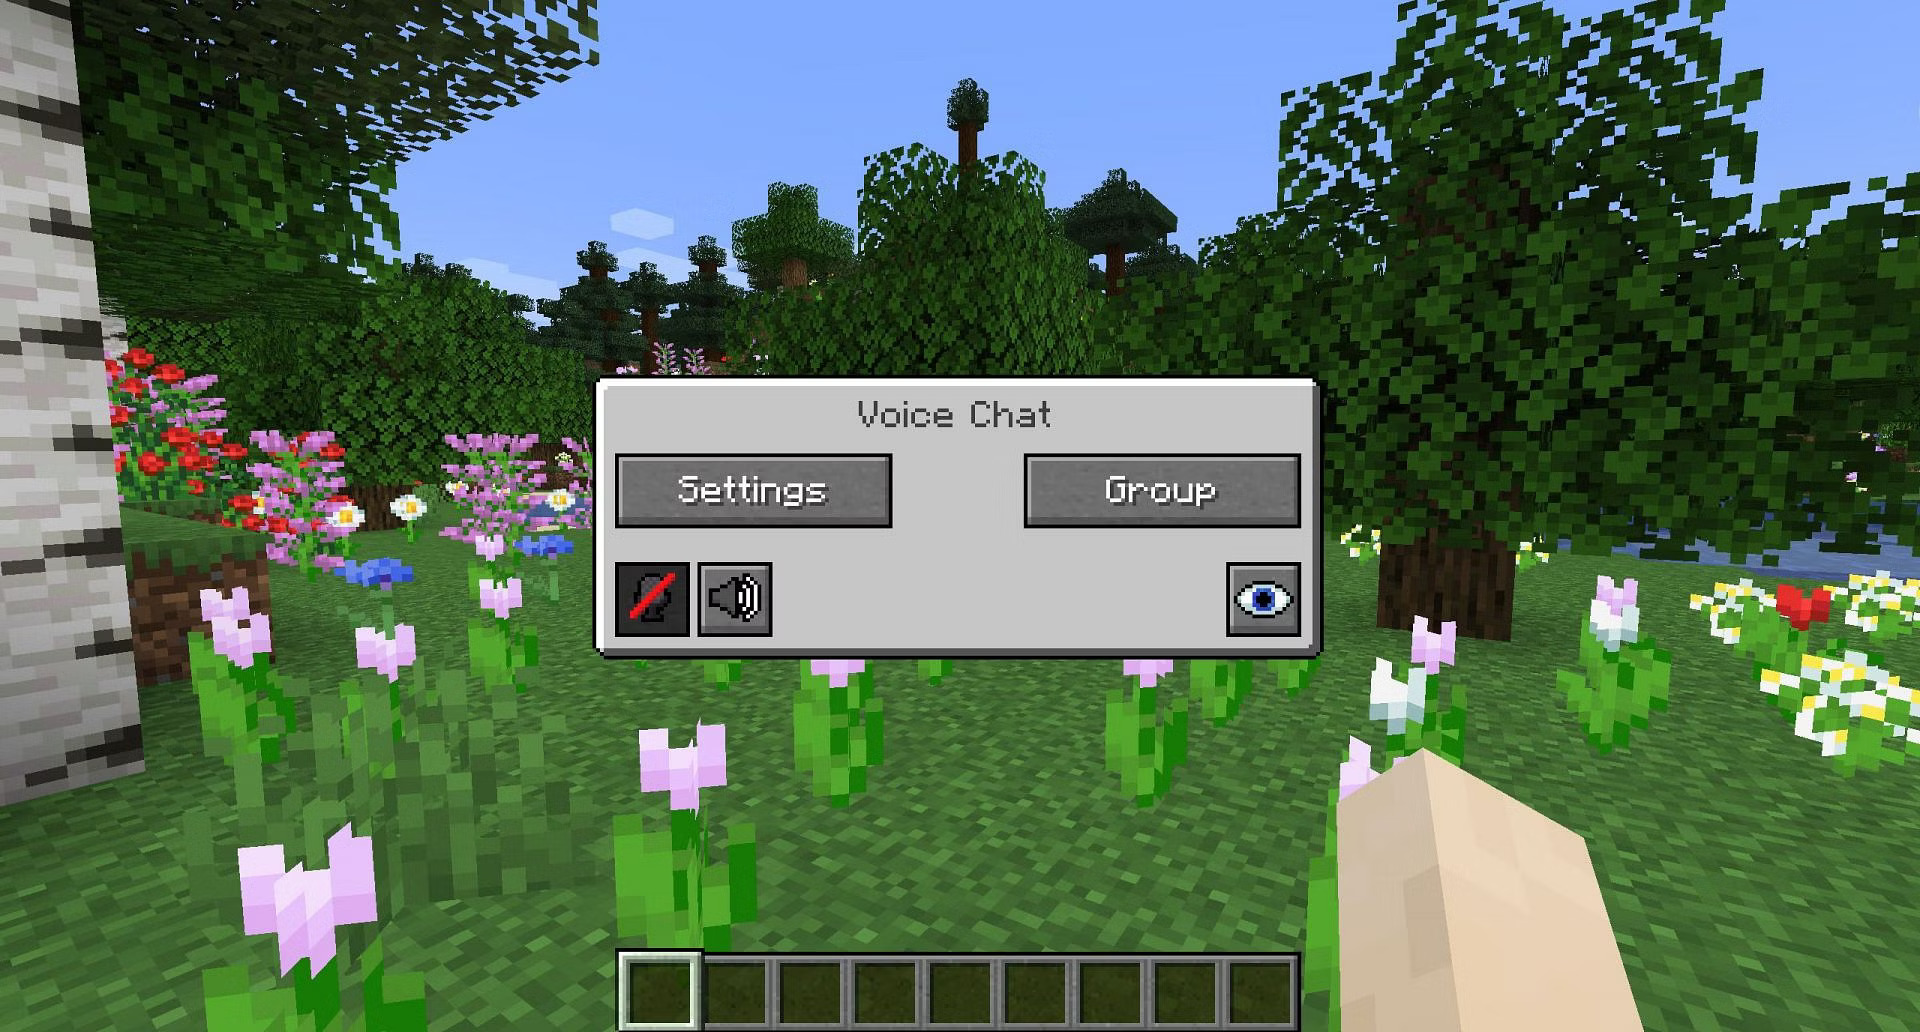 How to add voice chat to Minecraft